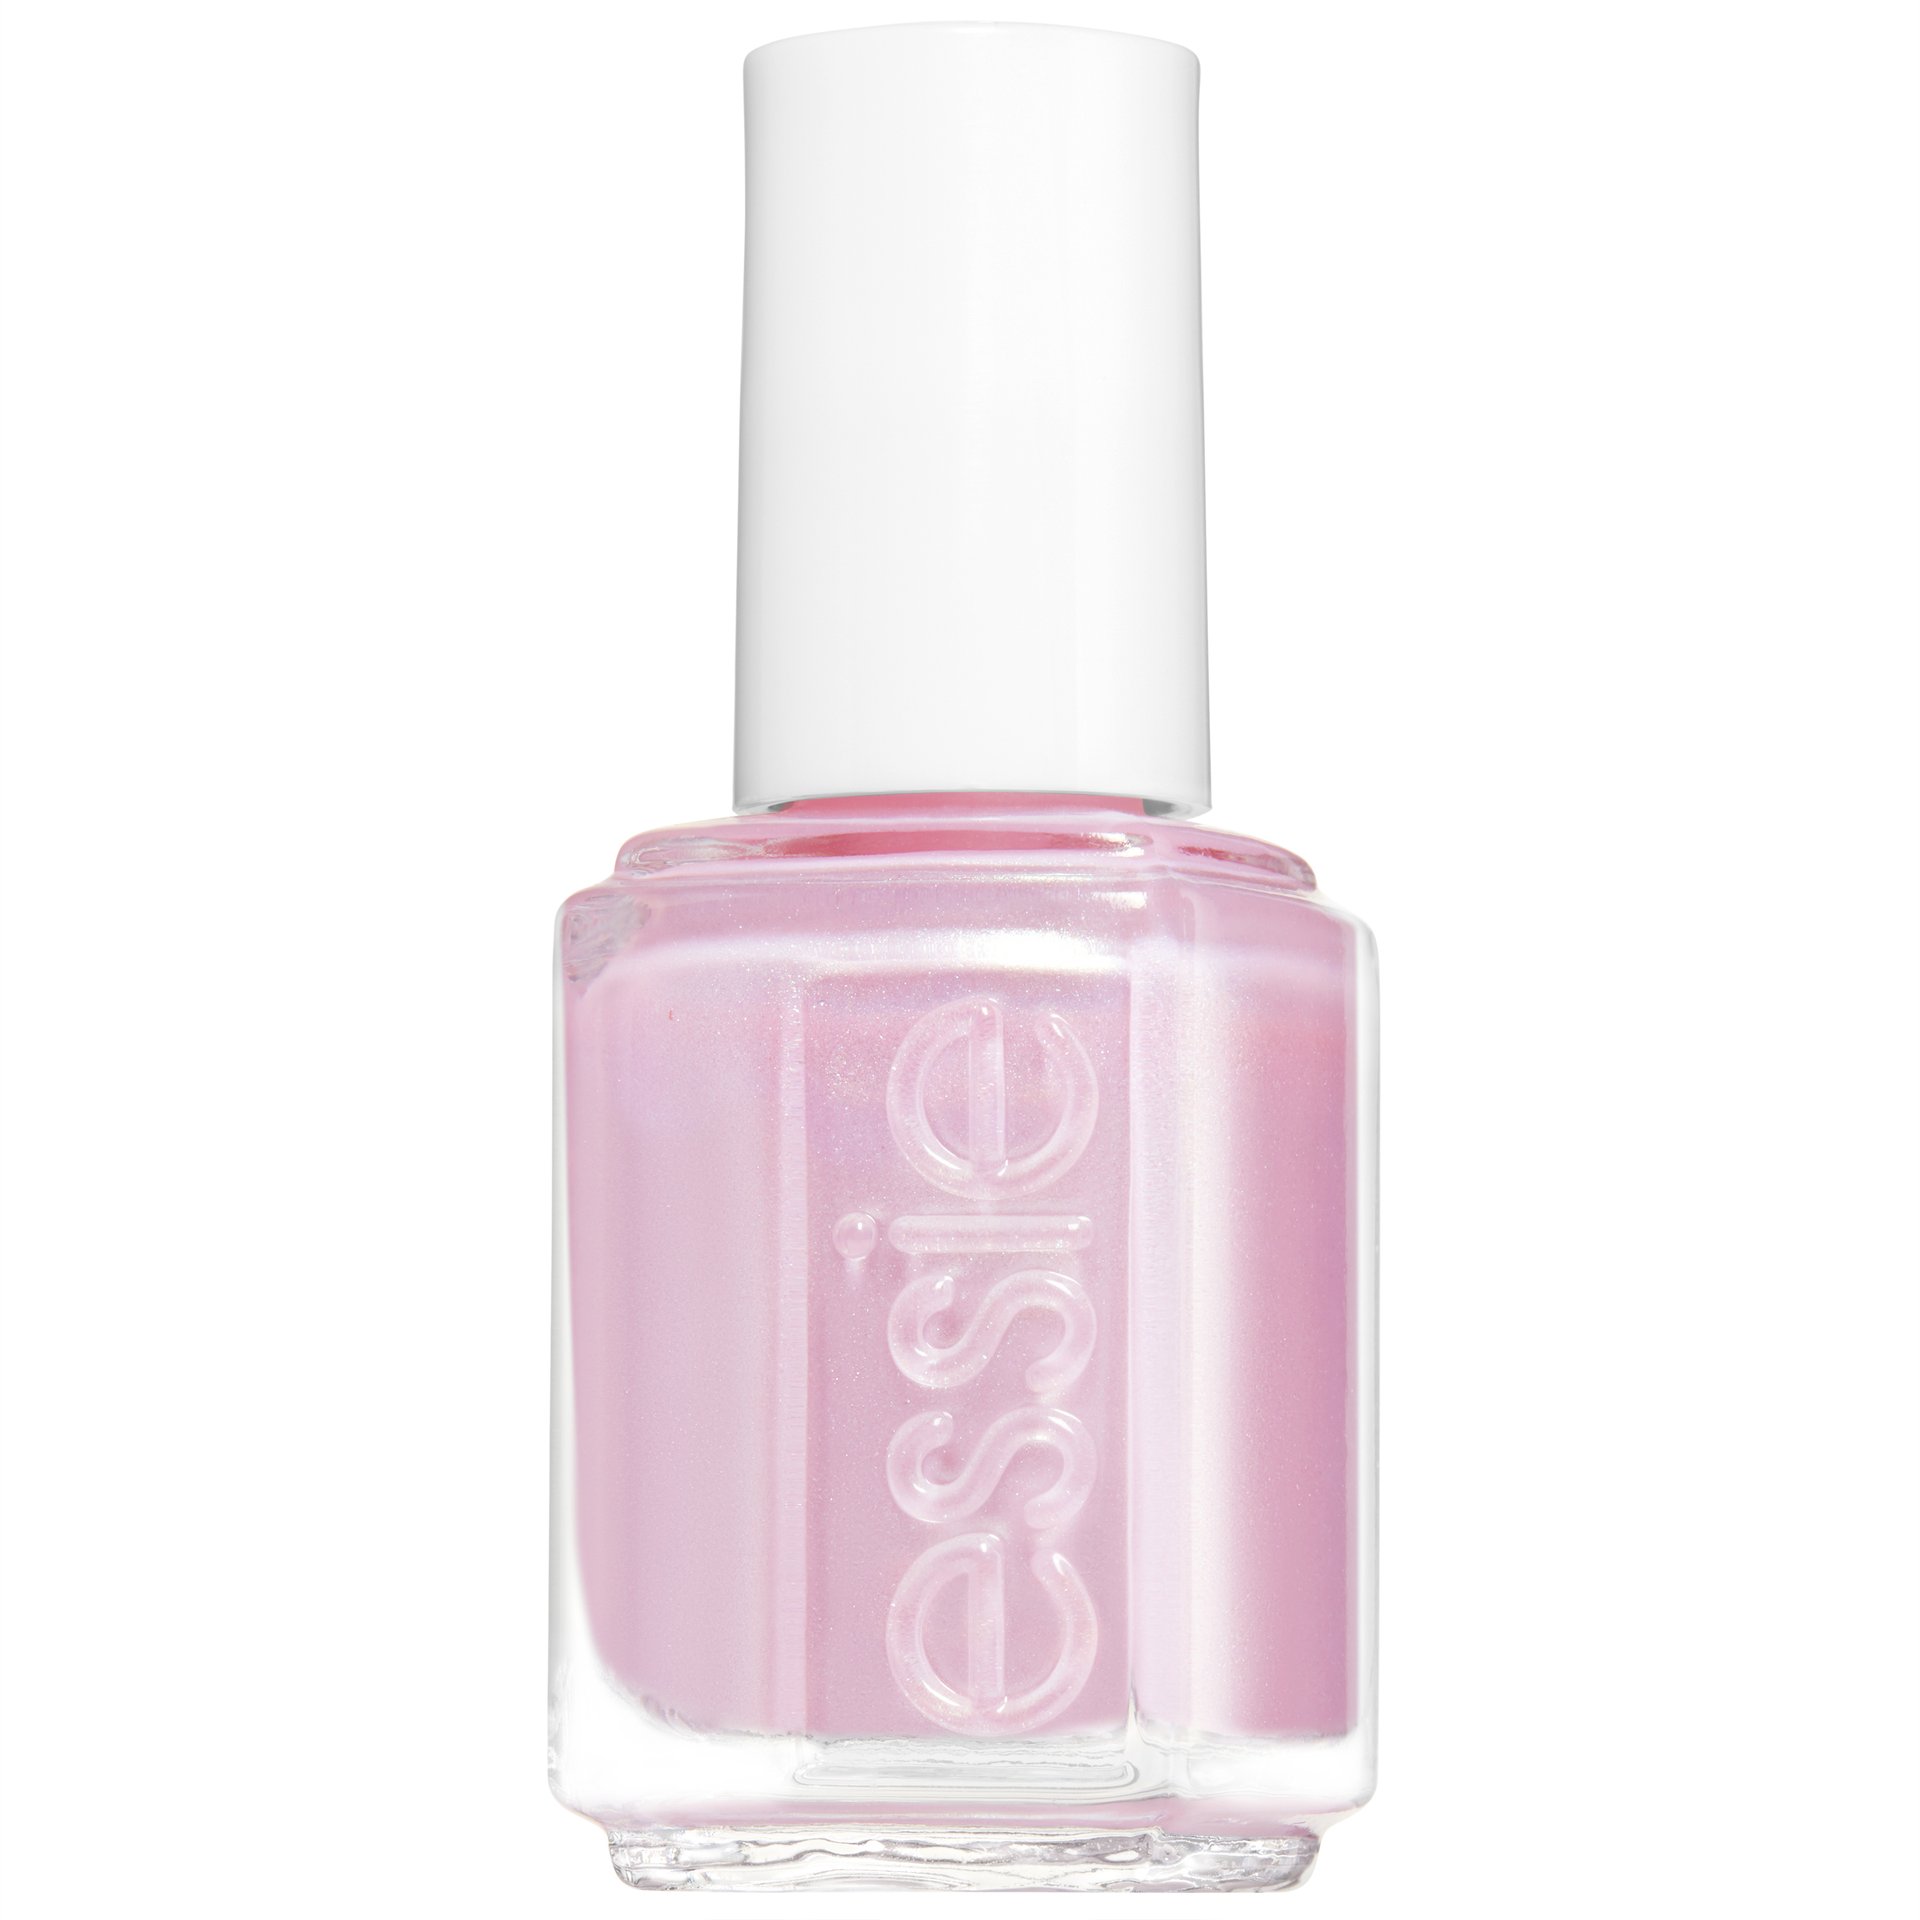 Essie 2012 Repstyle Collection  Repstyle  Snake it up  ommorphia  beauty bar